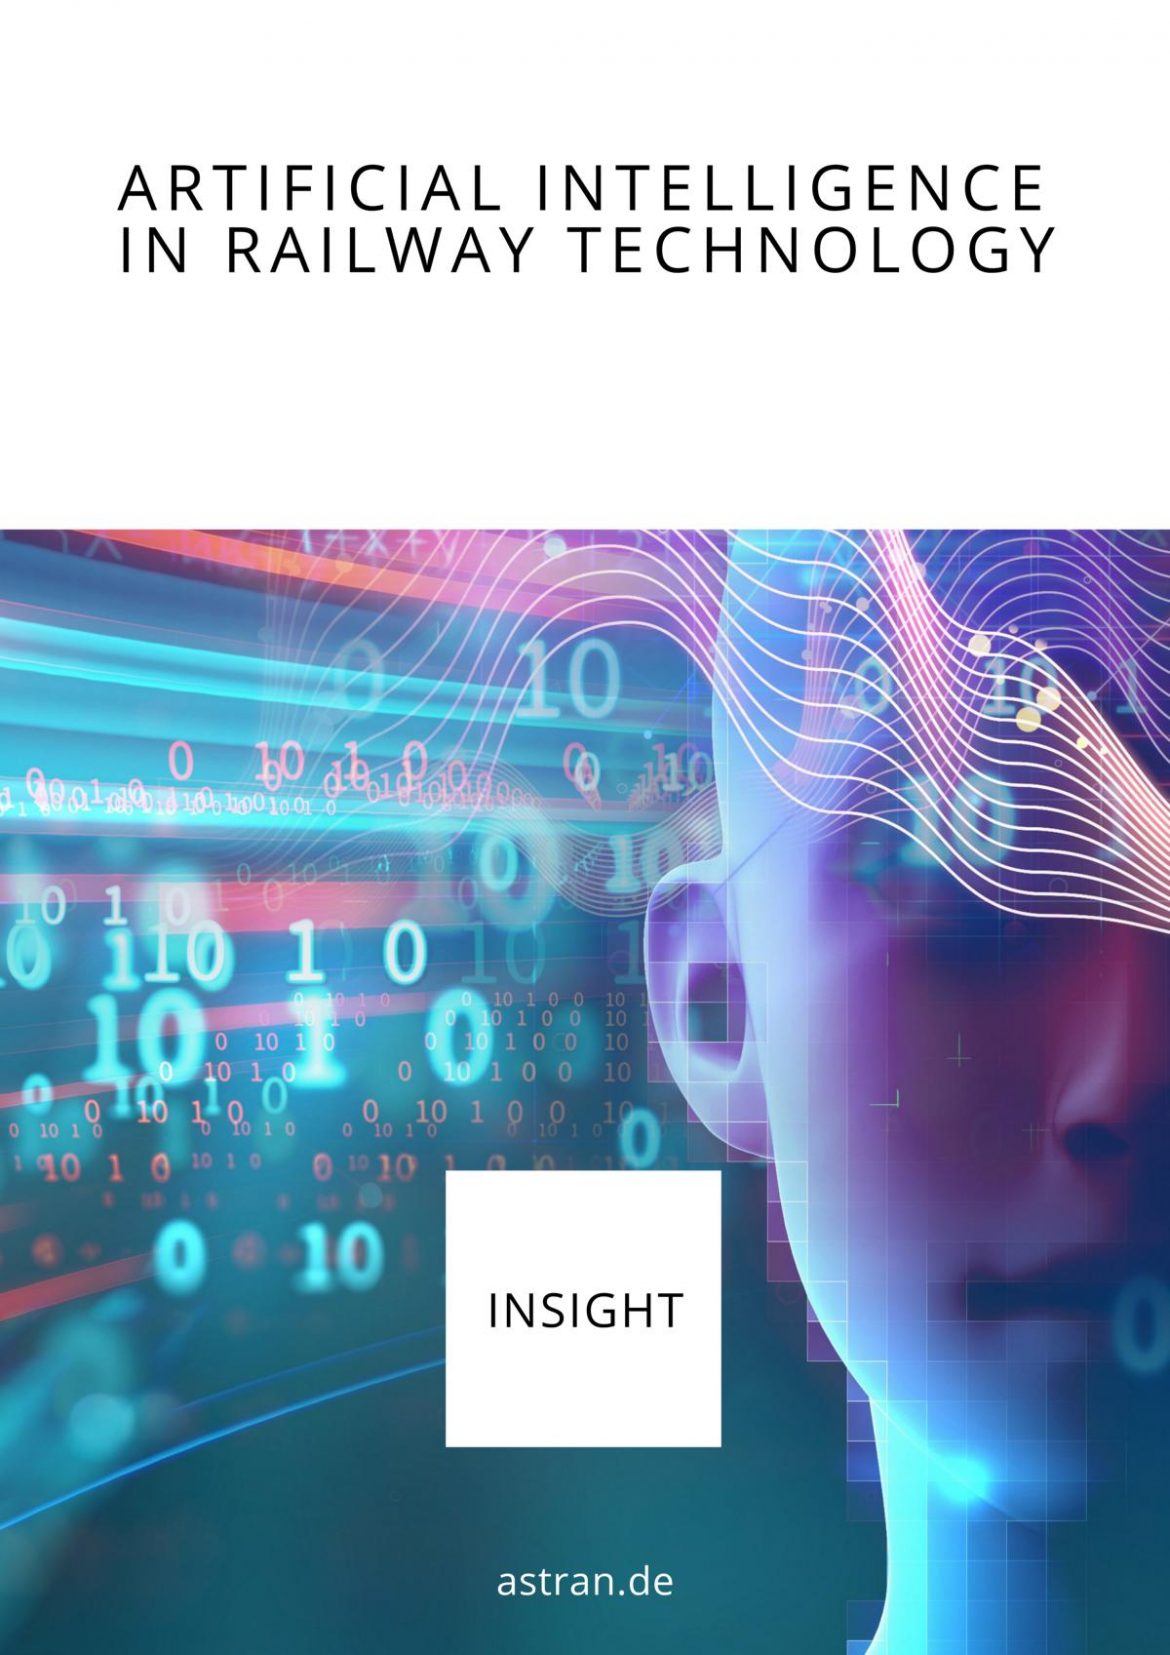 Artificial intelligence in railway technolgy